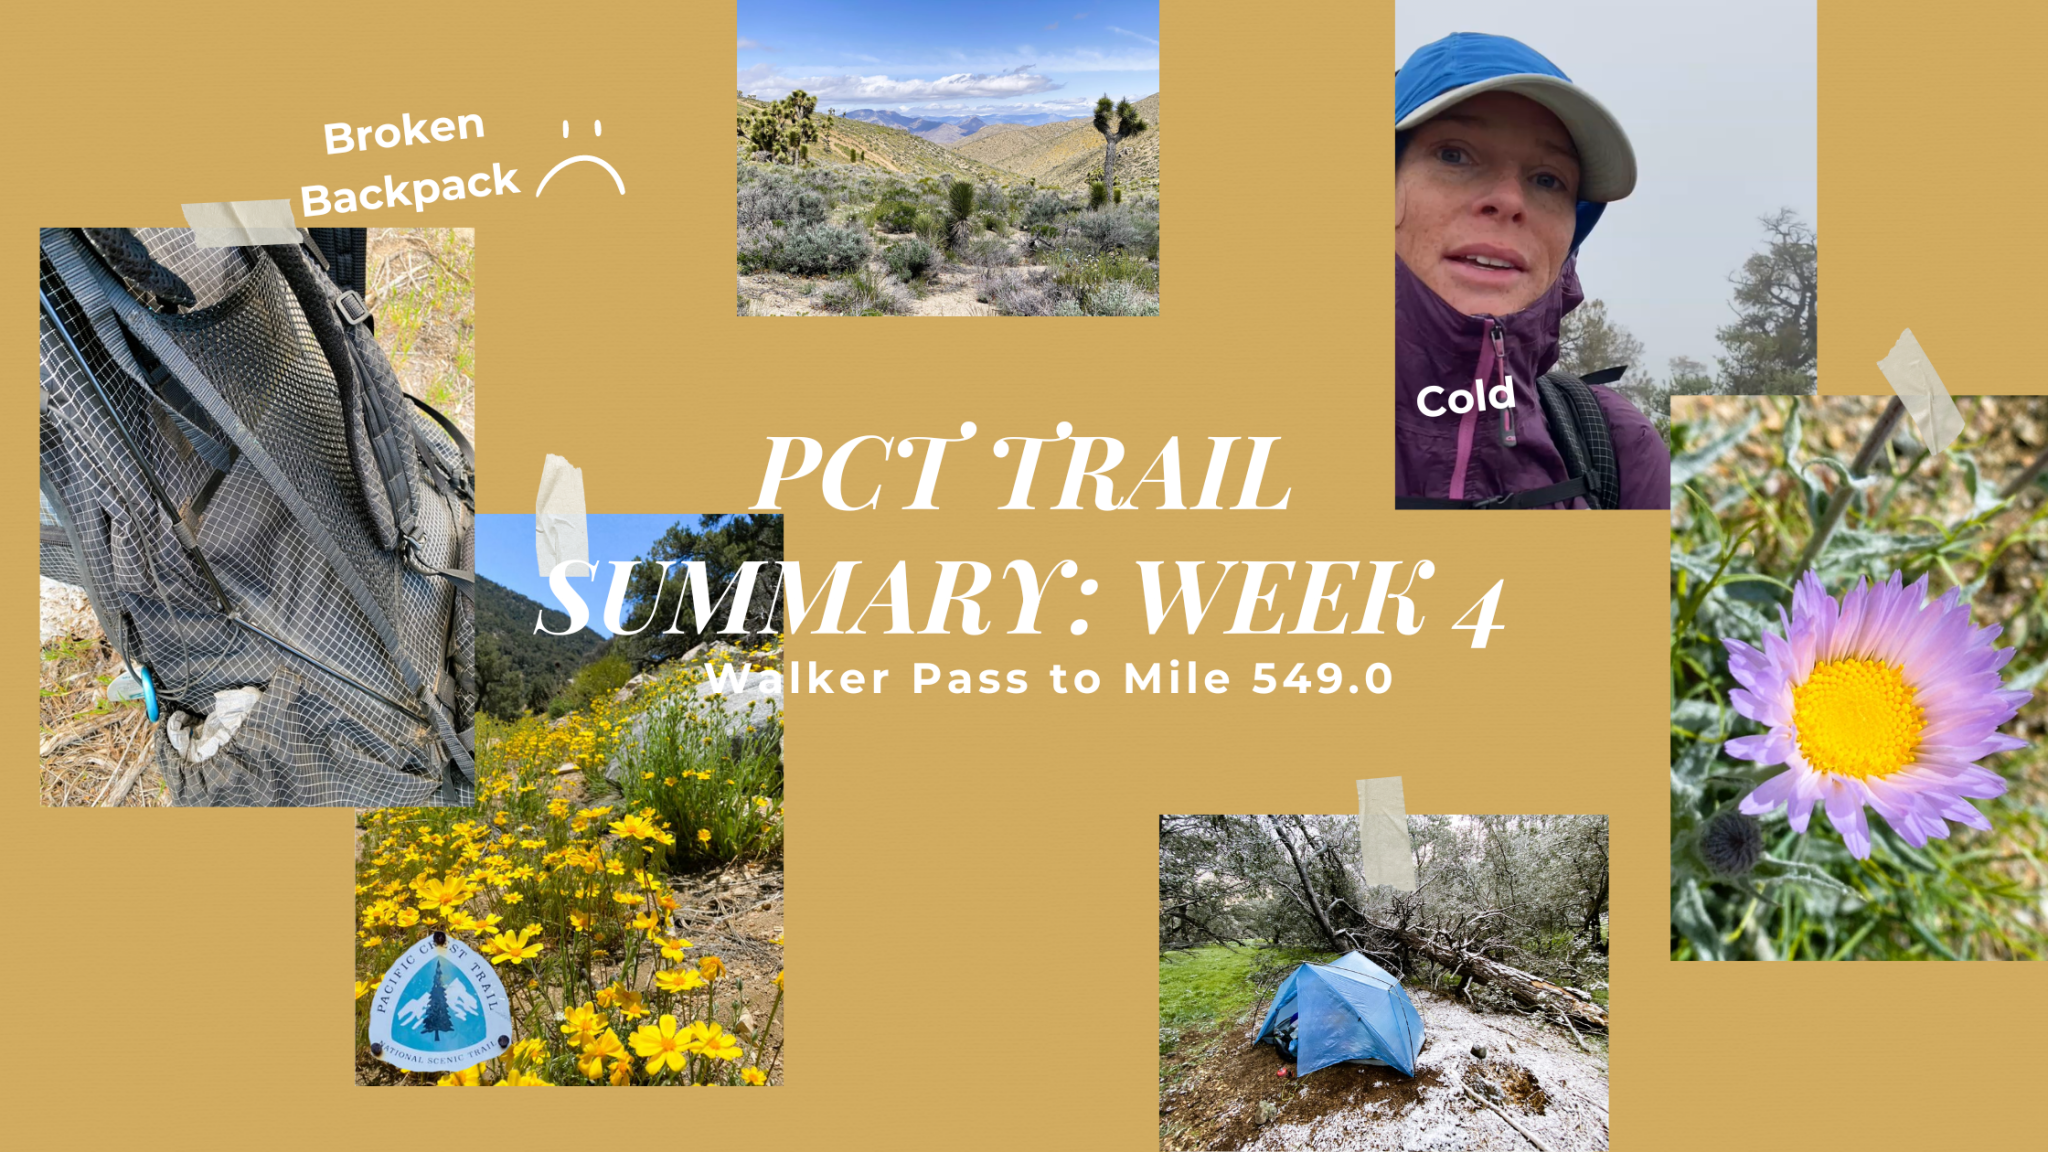 PCT Trail Summary week 4 walker pass to Mile 549.0